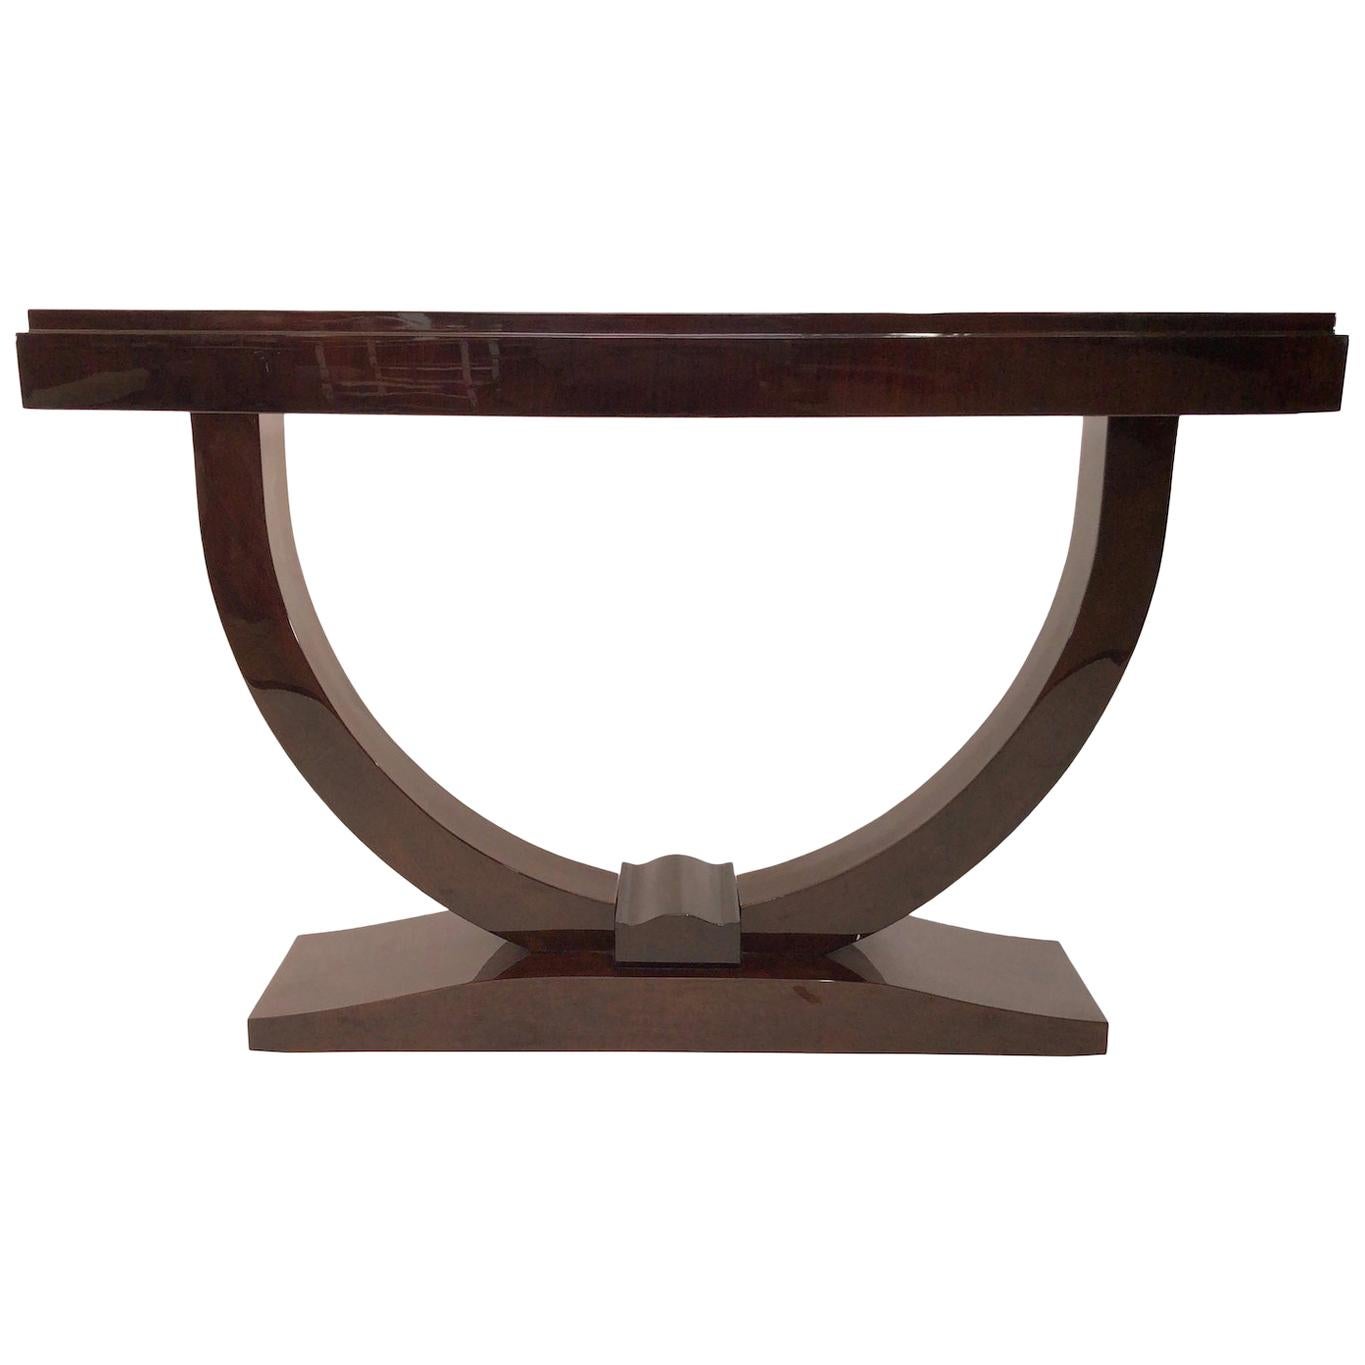 Original 1930s Art Deco Console Table in Real Wood Veneer For Sale